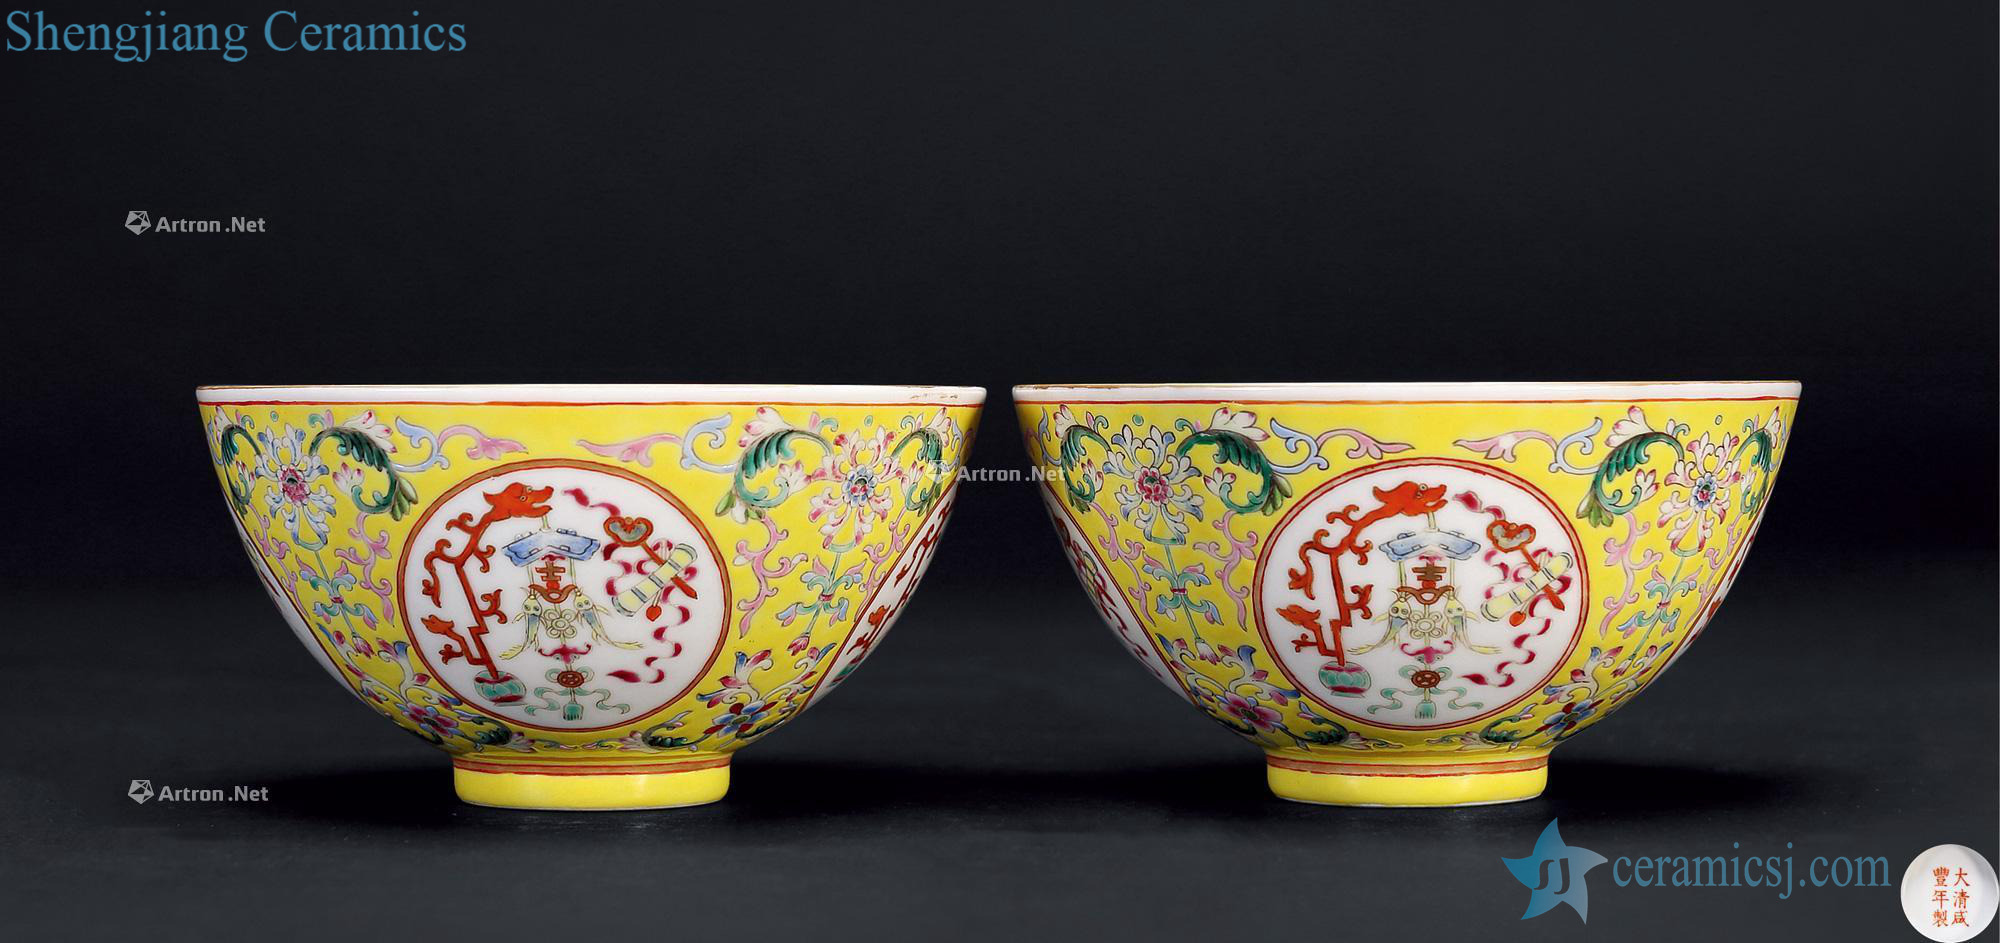 Qing xianfeng pastel yellow medallion flowers green-splashed bowls (a)